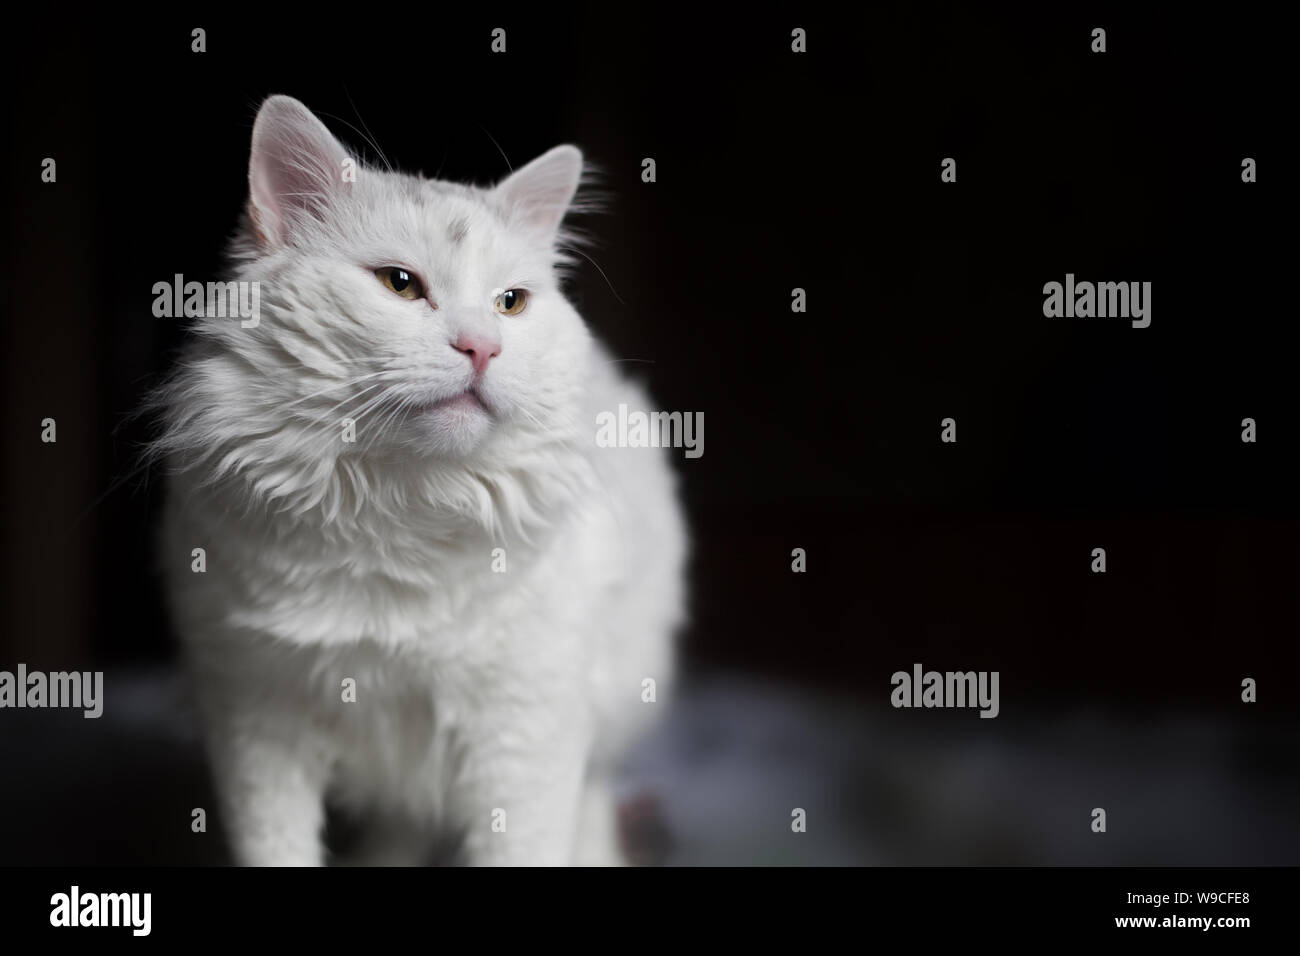 A beautiful white cat is standing on the bed and looking forward with interest and curiosity Stock Photo